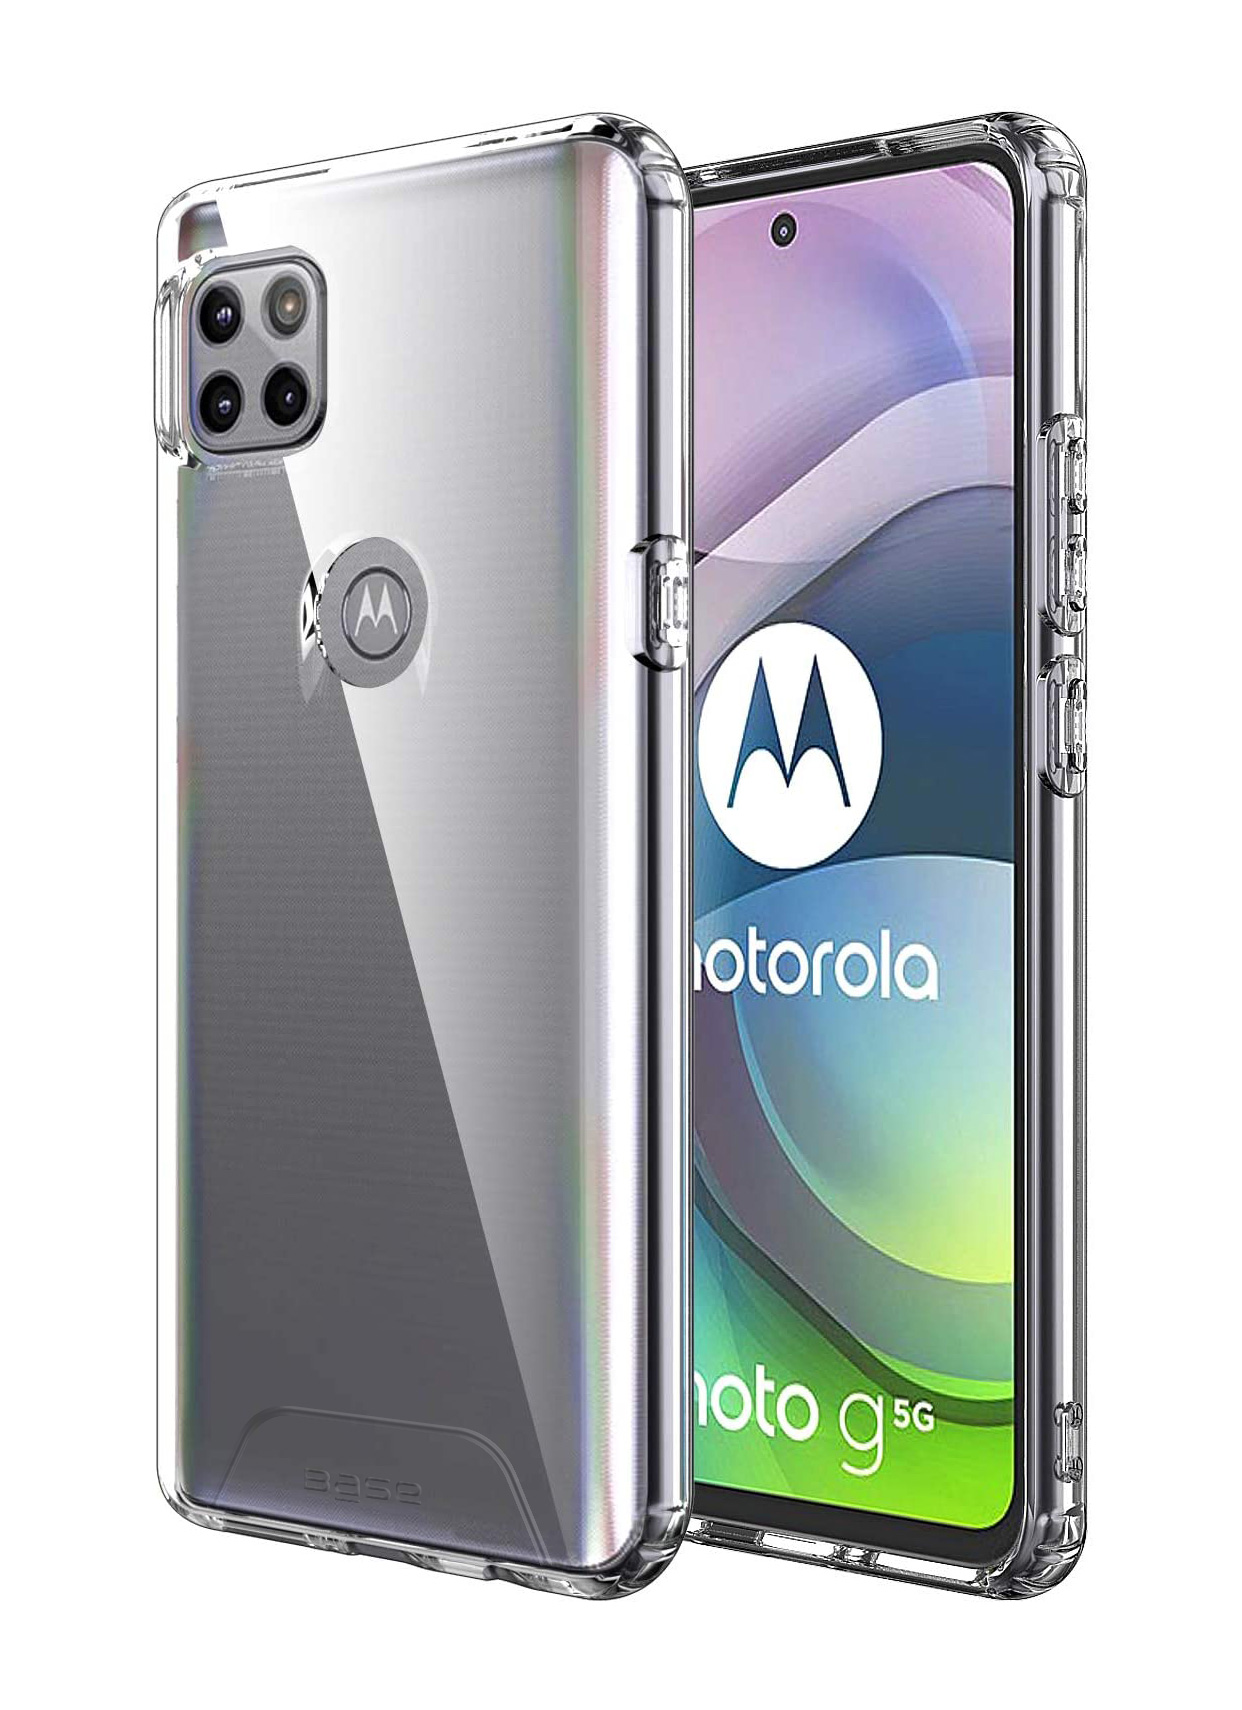 crystal clear Slim Protective Case for Moto One Ace 5G cell phones